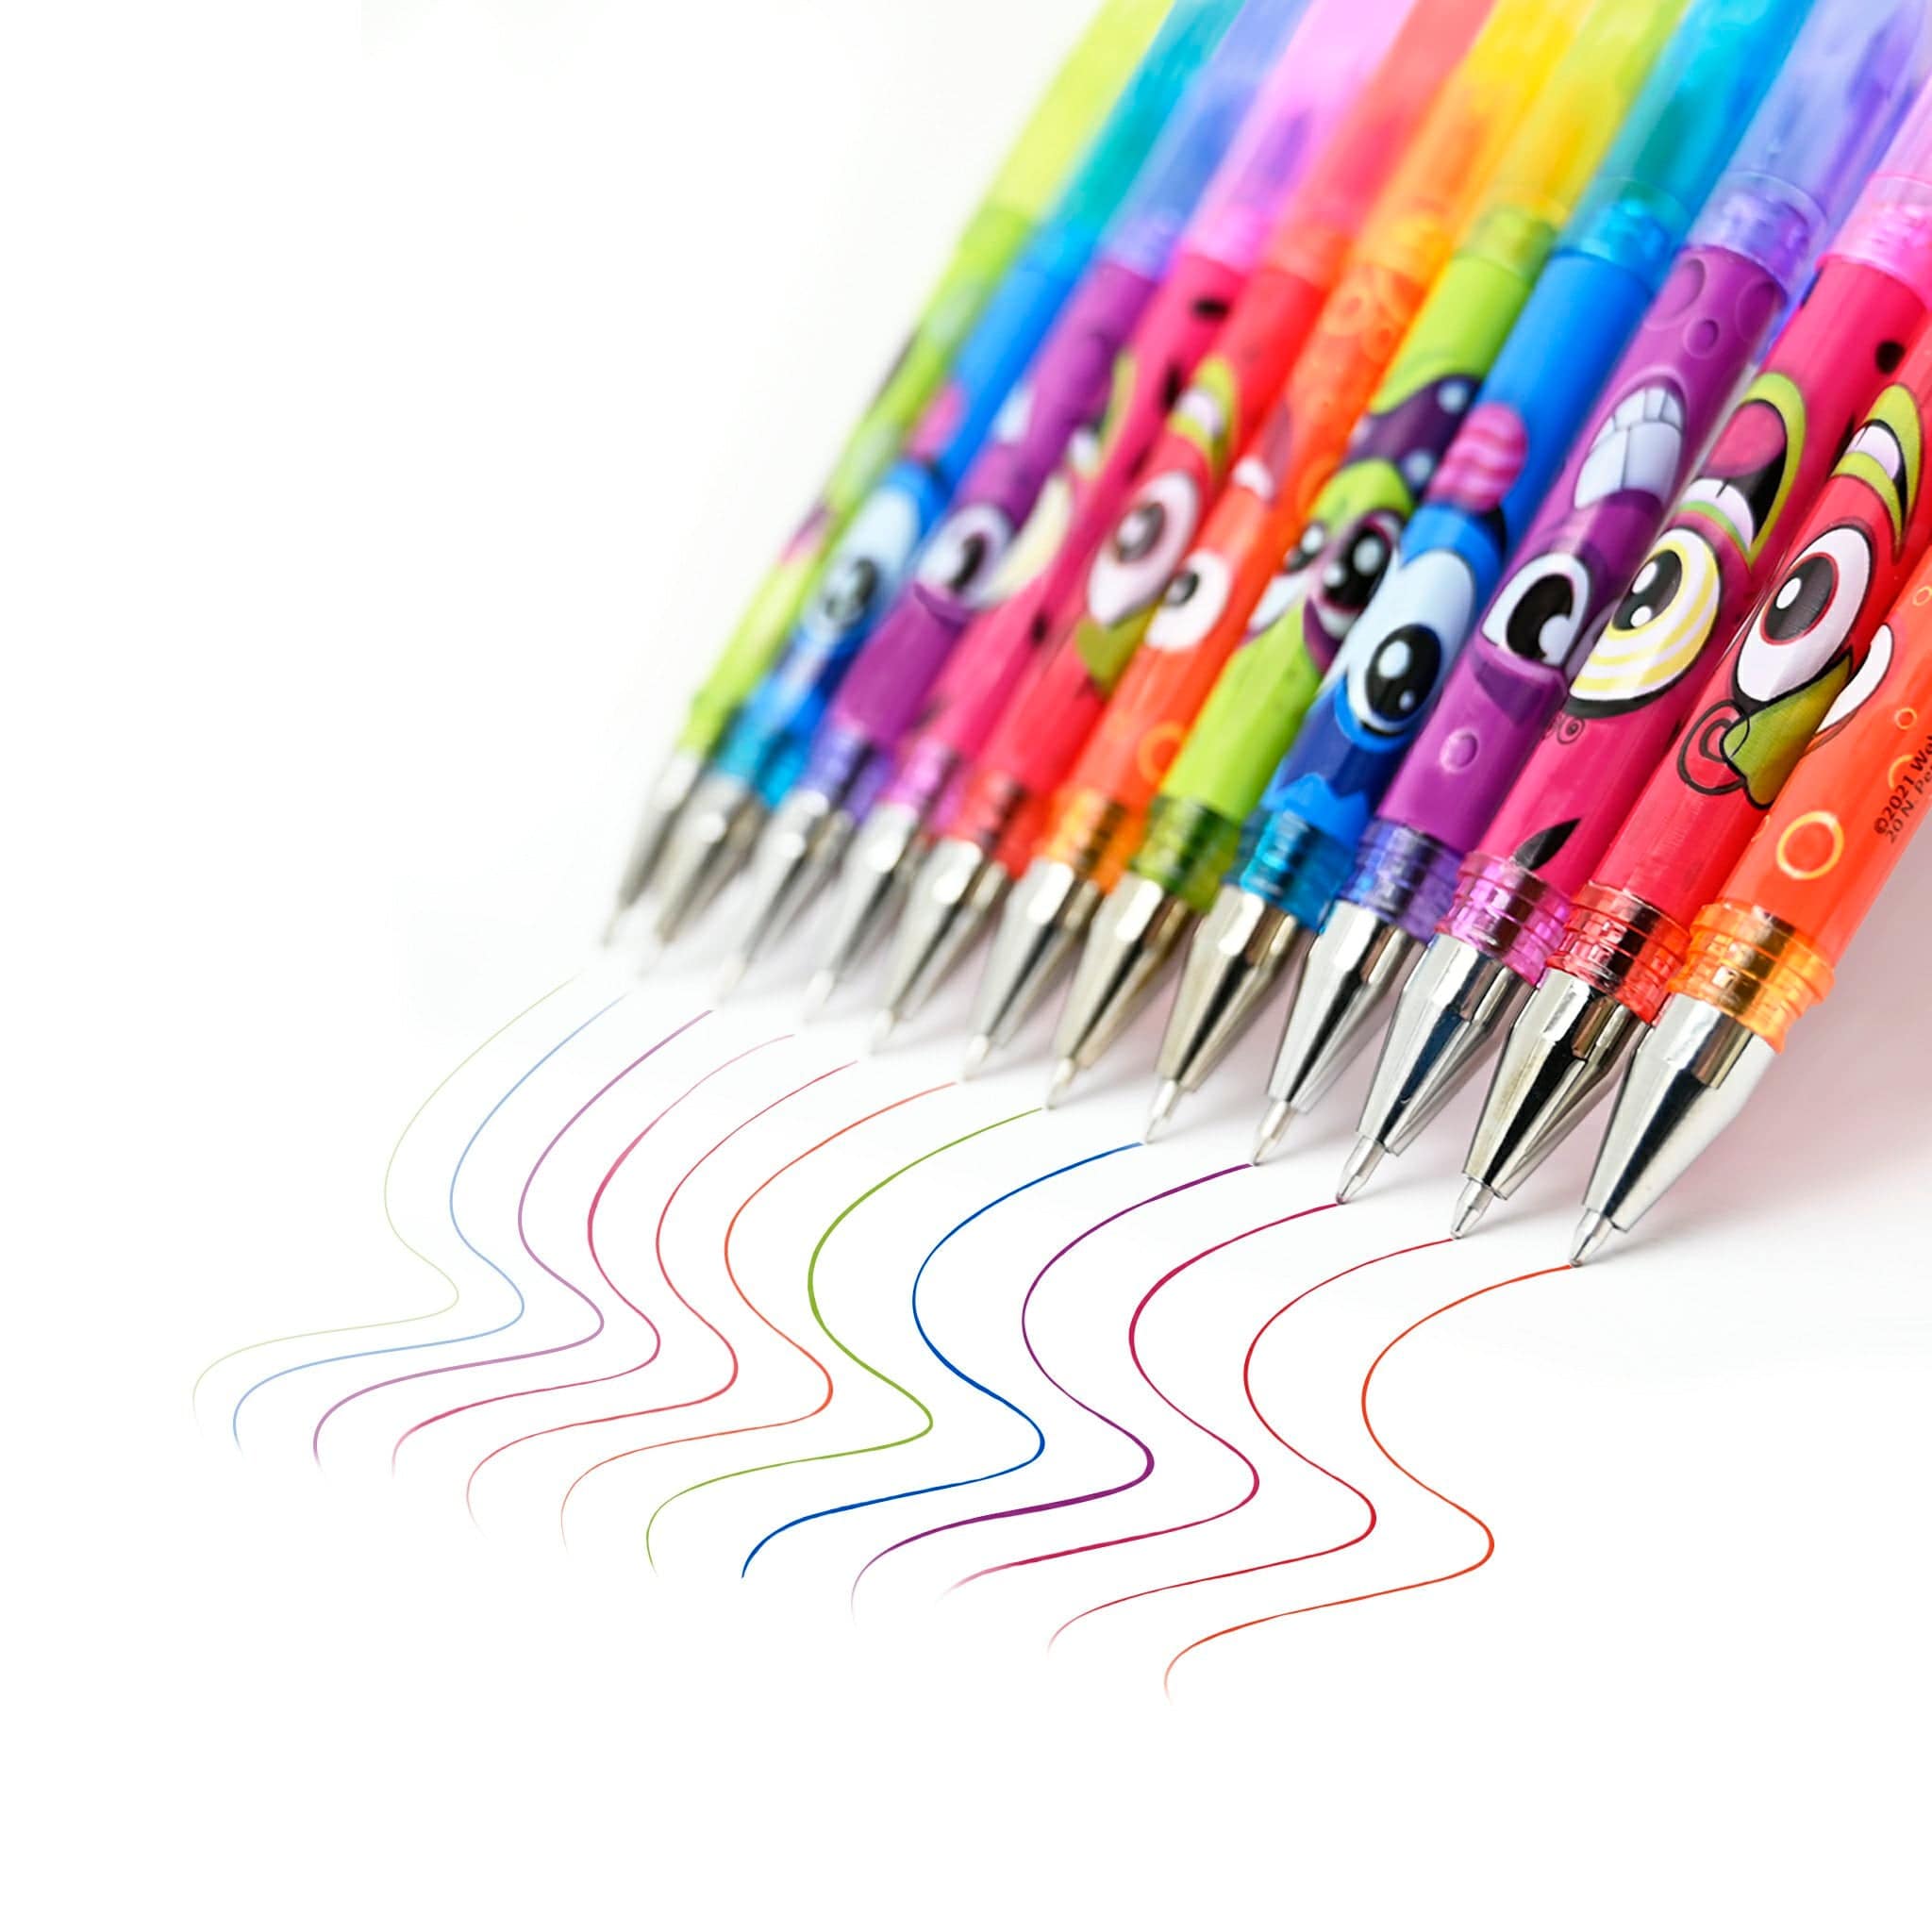 60 Wholesale SmelL-O-Rama Mini Scented Gel Pens - at 